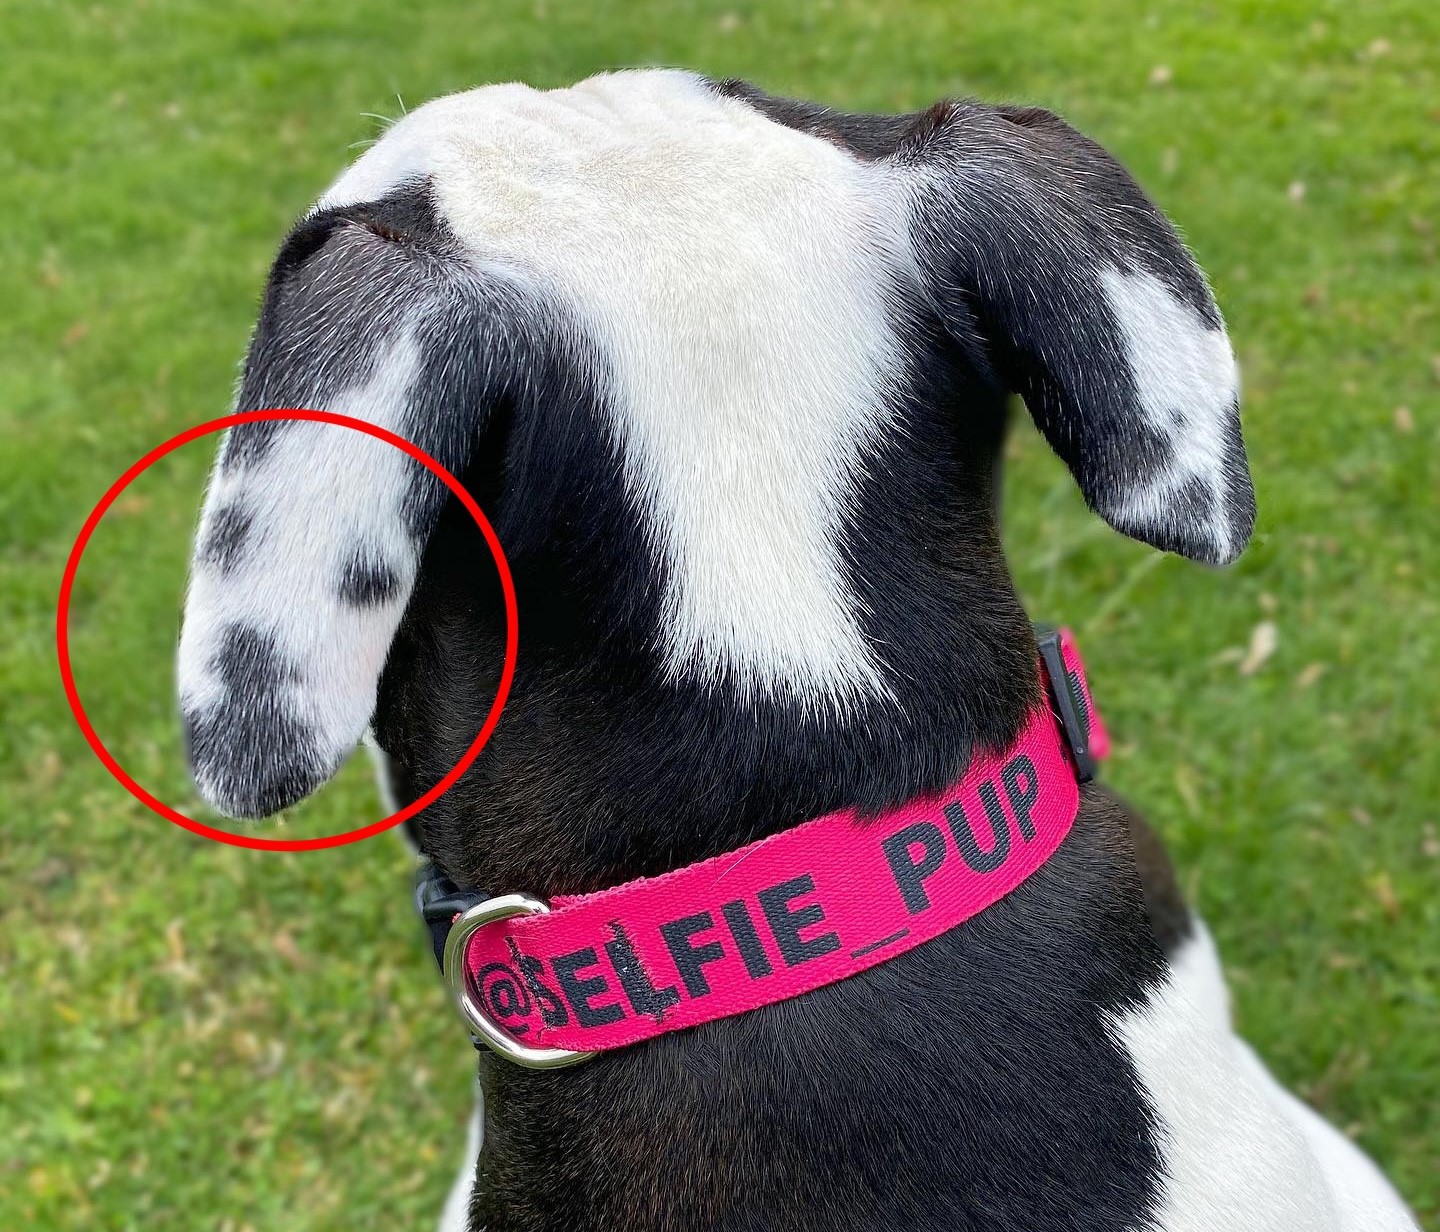 adorable rescue dog goes viral on social media for unique marks with a “selfie” on her ear – a white mark with black dots for eyes and mouth.